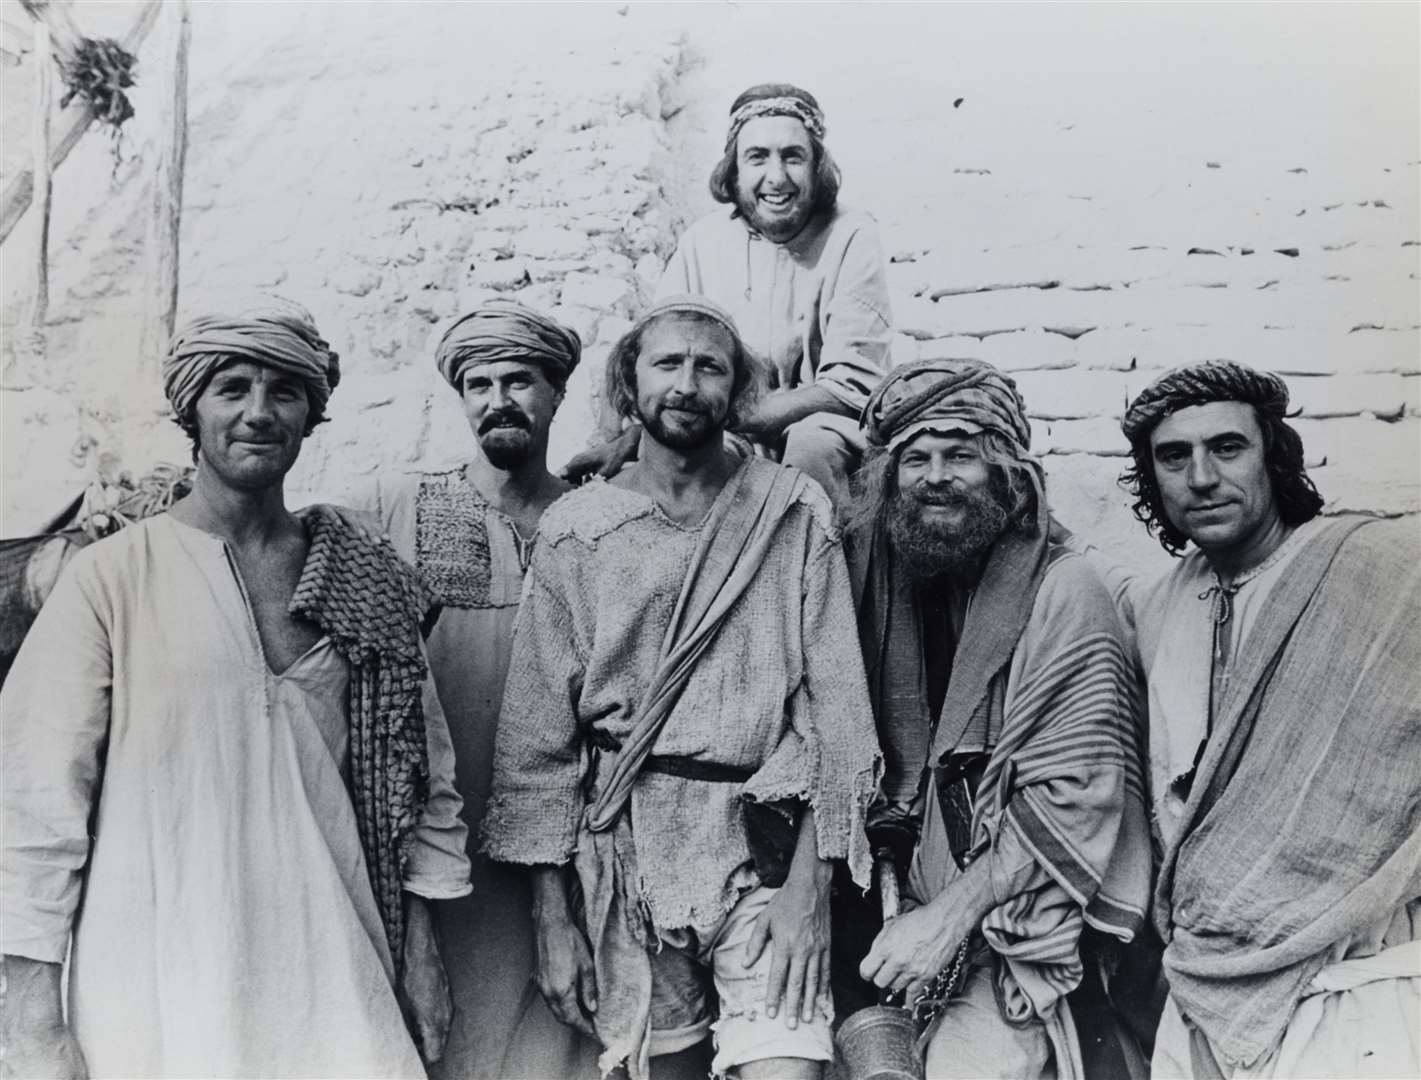 The Monty Python team during filming of 1979's Life Of Brian - Graham Chapman centre front Picture: Python (Monty) Pictures Ltd